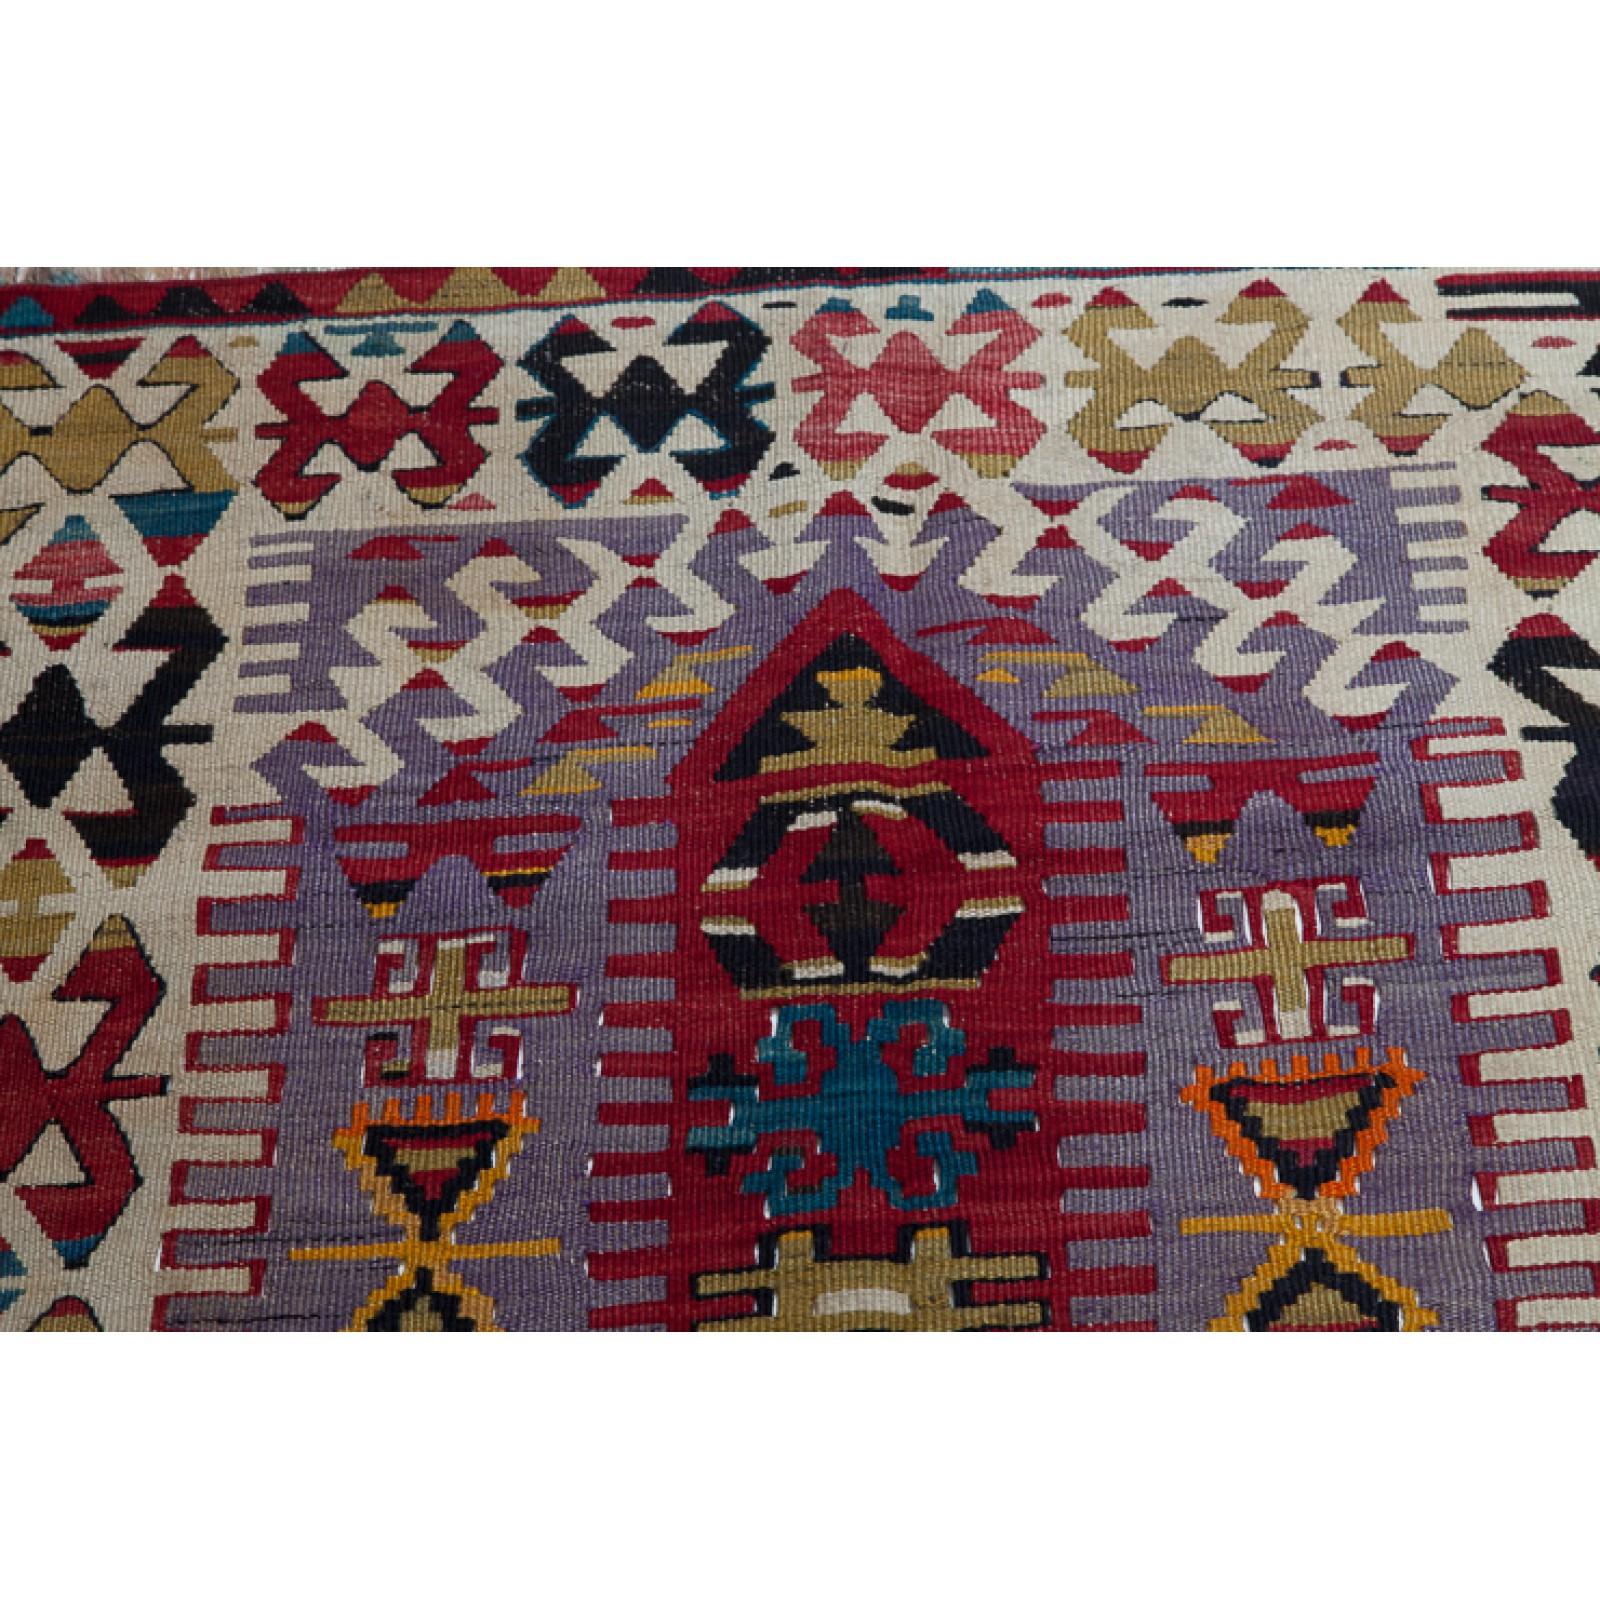 This is a Western Anatolian vintage Kilim from the Esme ( Eshme ) region with a rare and beautiful color composition.

This type of large Esme Kilims often features hexagonal medallions, either arranged in pairs or woven singly as central motifs,